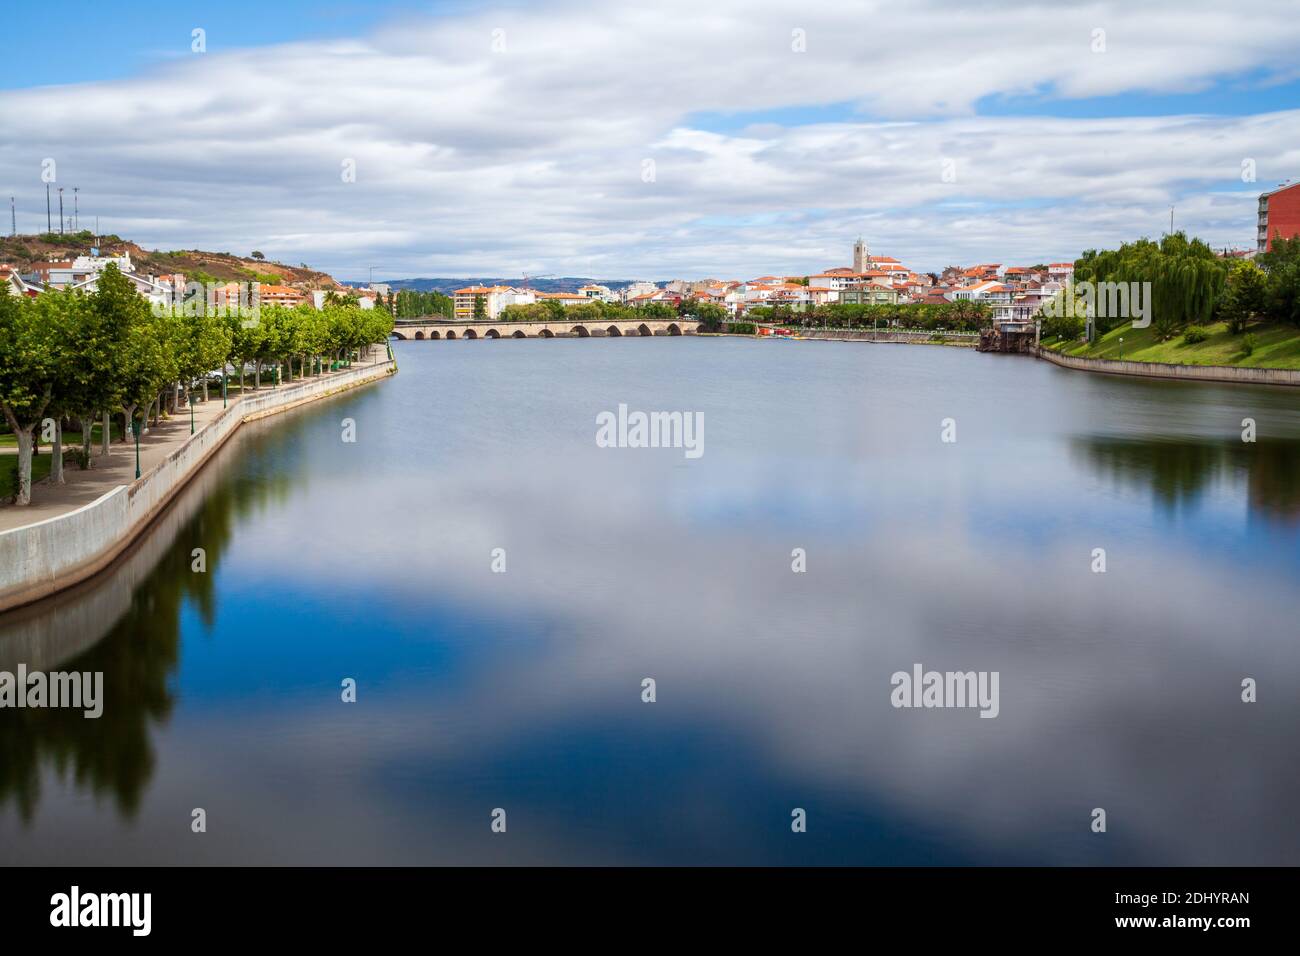 Urban landscape of the city of Mirandela in the north of Portugal. Panoramic view of the banks of the river Tua with the traditional Roman bridge and Stock Photo